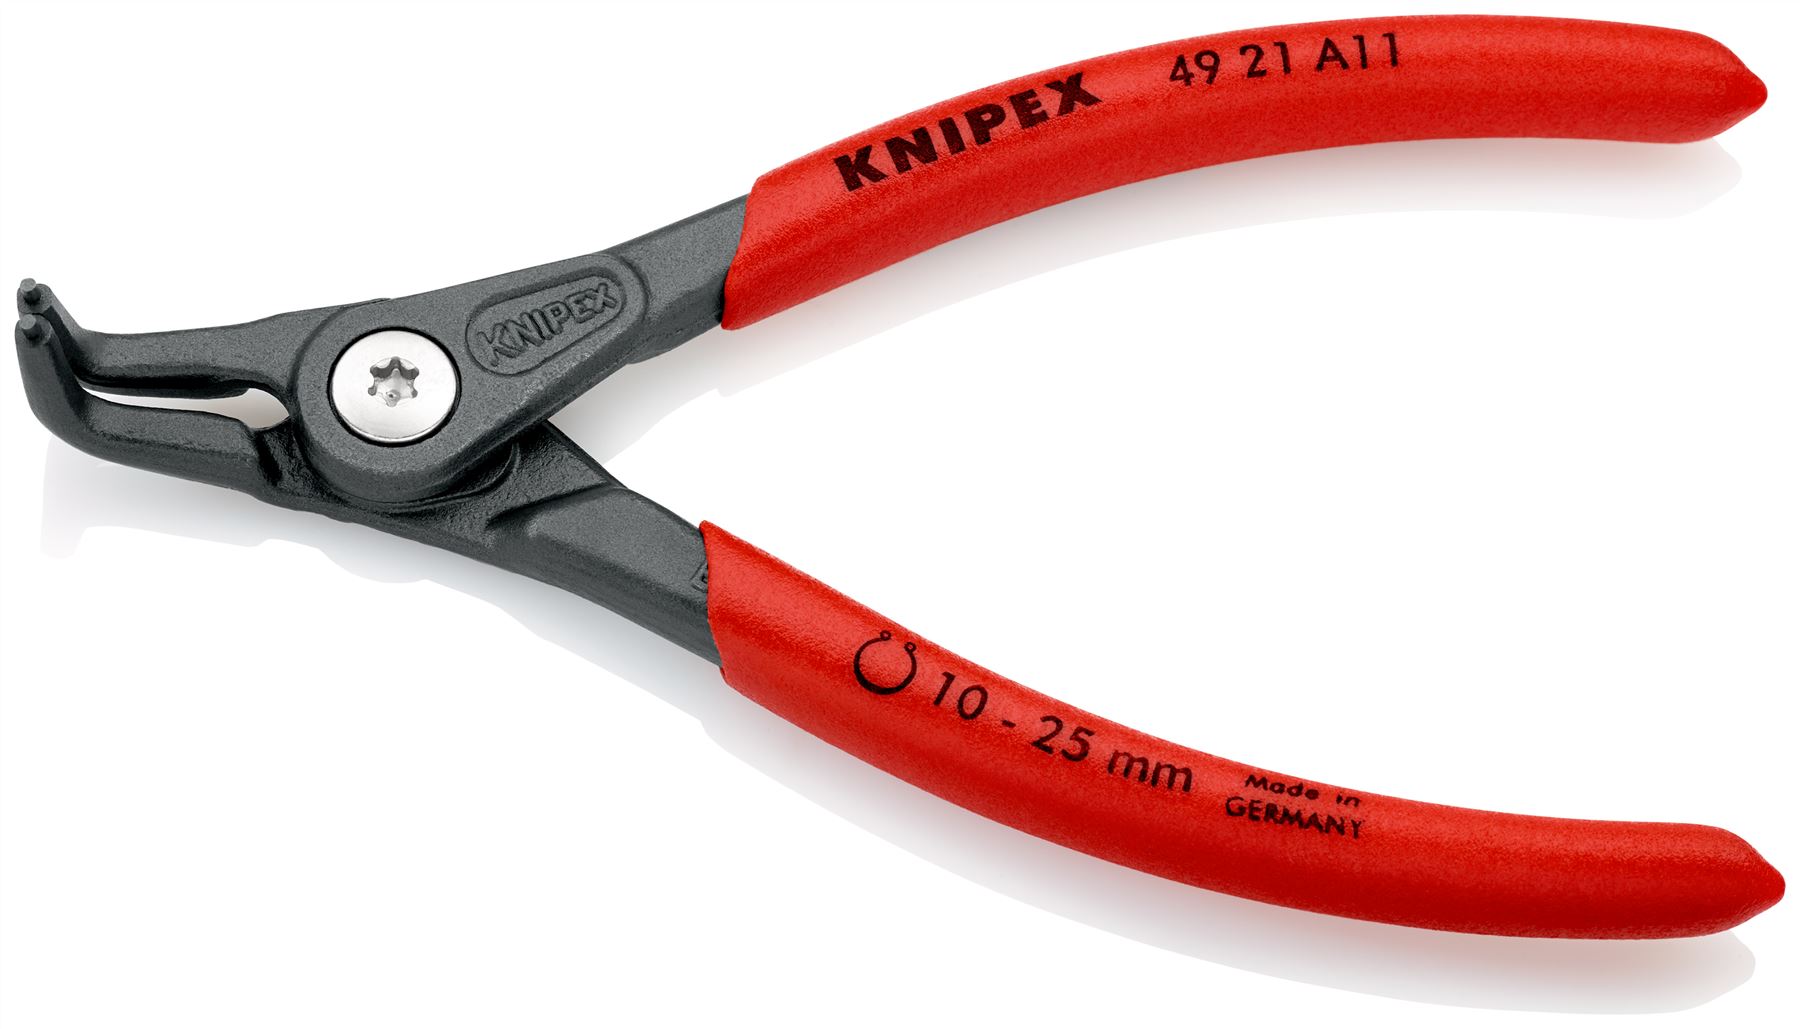 KNIPEX Precision Circlip Pliers for External Circlips on Shafts 90° Angled 130mm 1.3mm Diameter Tips 49 21 A11